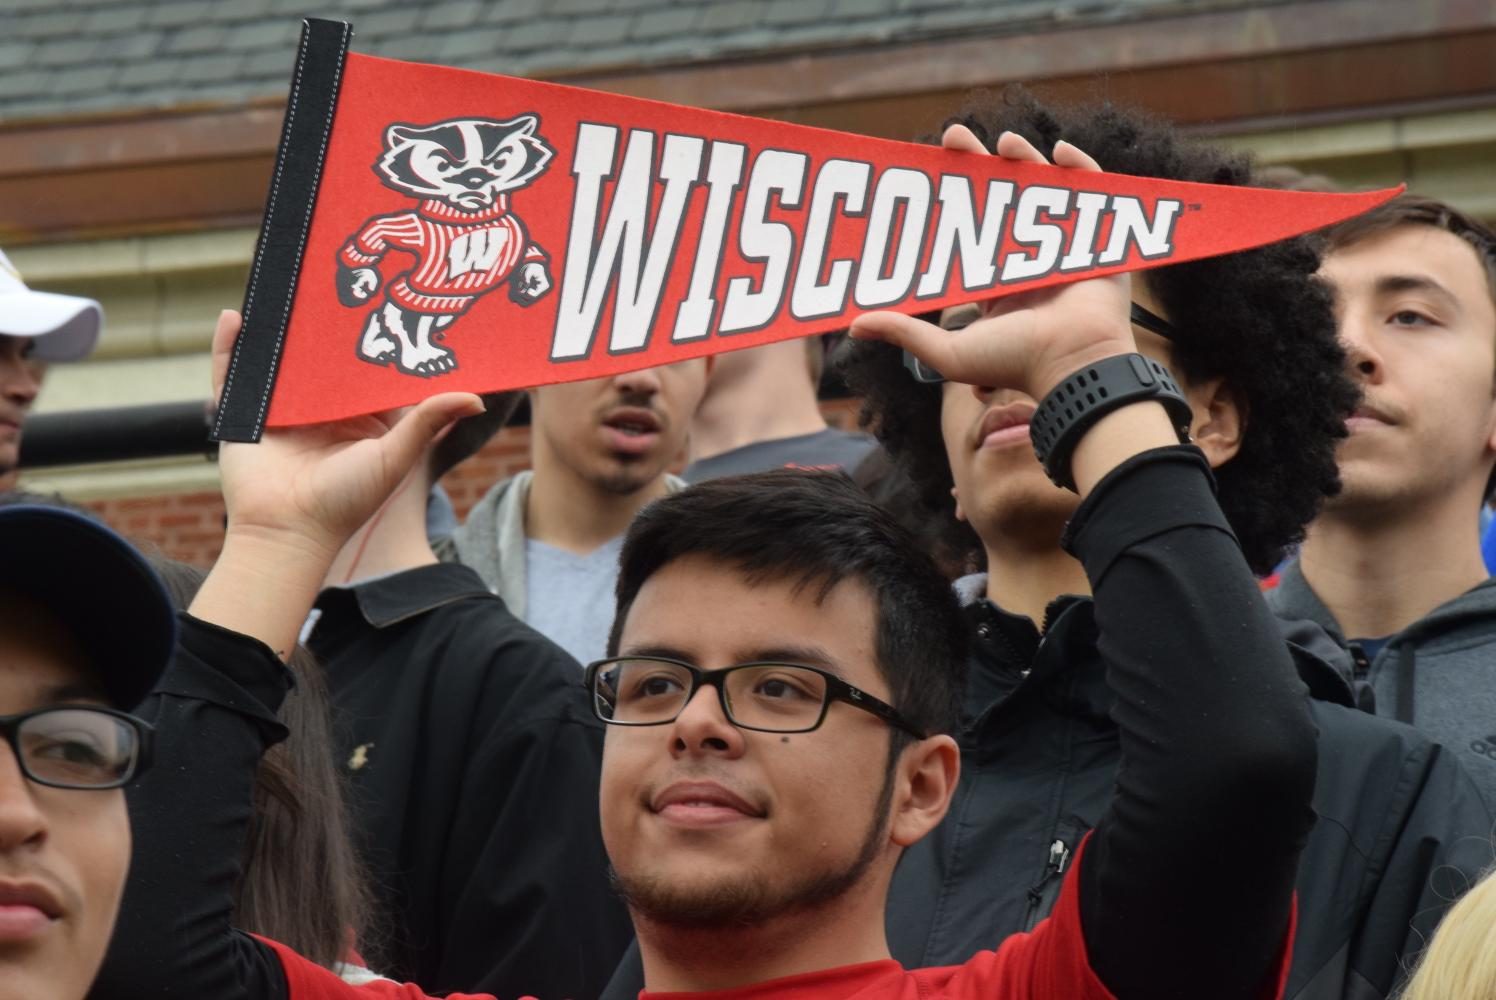 Kevin Vilchez (University of Wisconsin-Madison) poses for class of 2017 picture, proudly holding up a banner from the University of Wisconsin-Madison